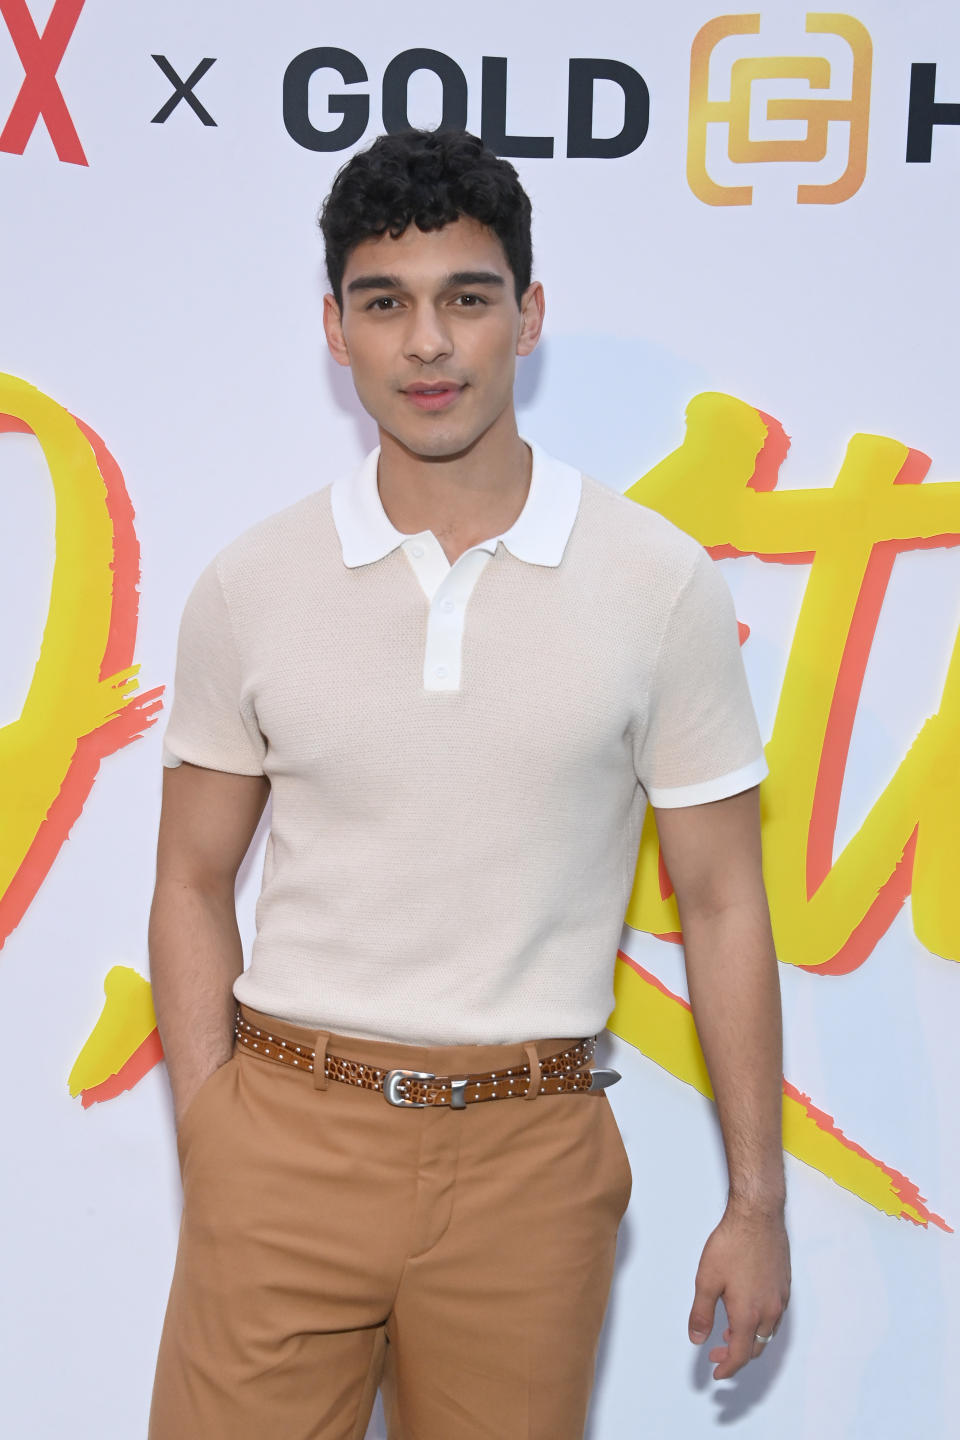 Anthony Keyvan poses for photographers at a red carpet event